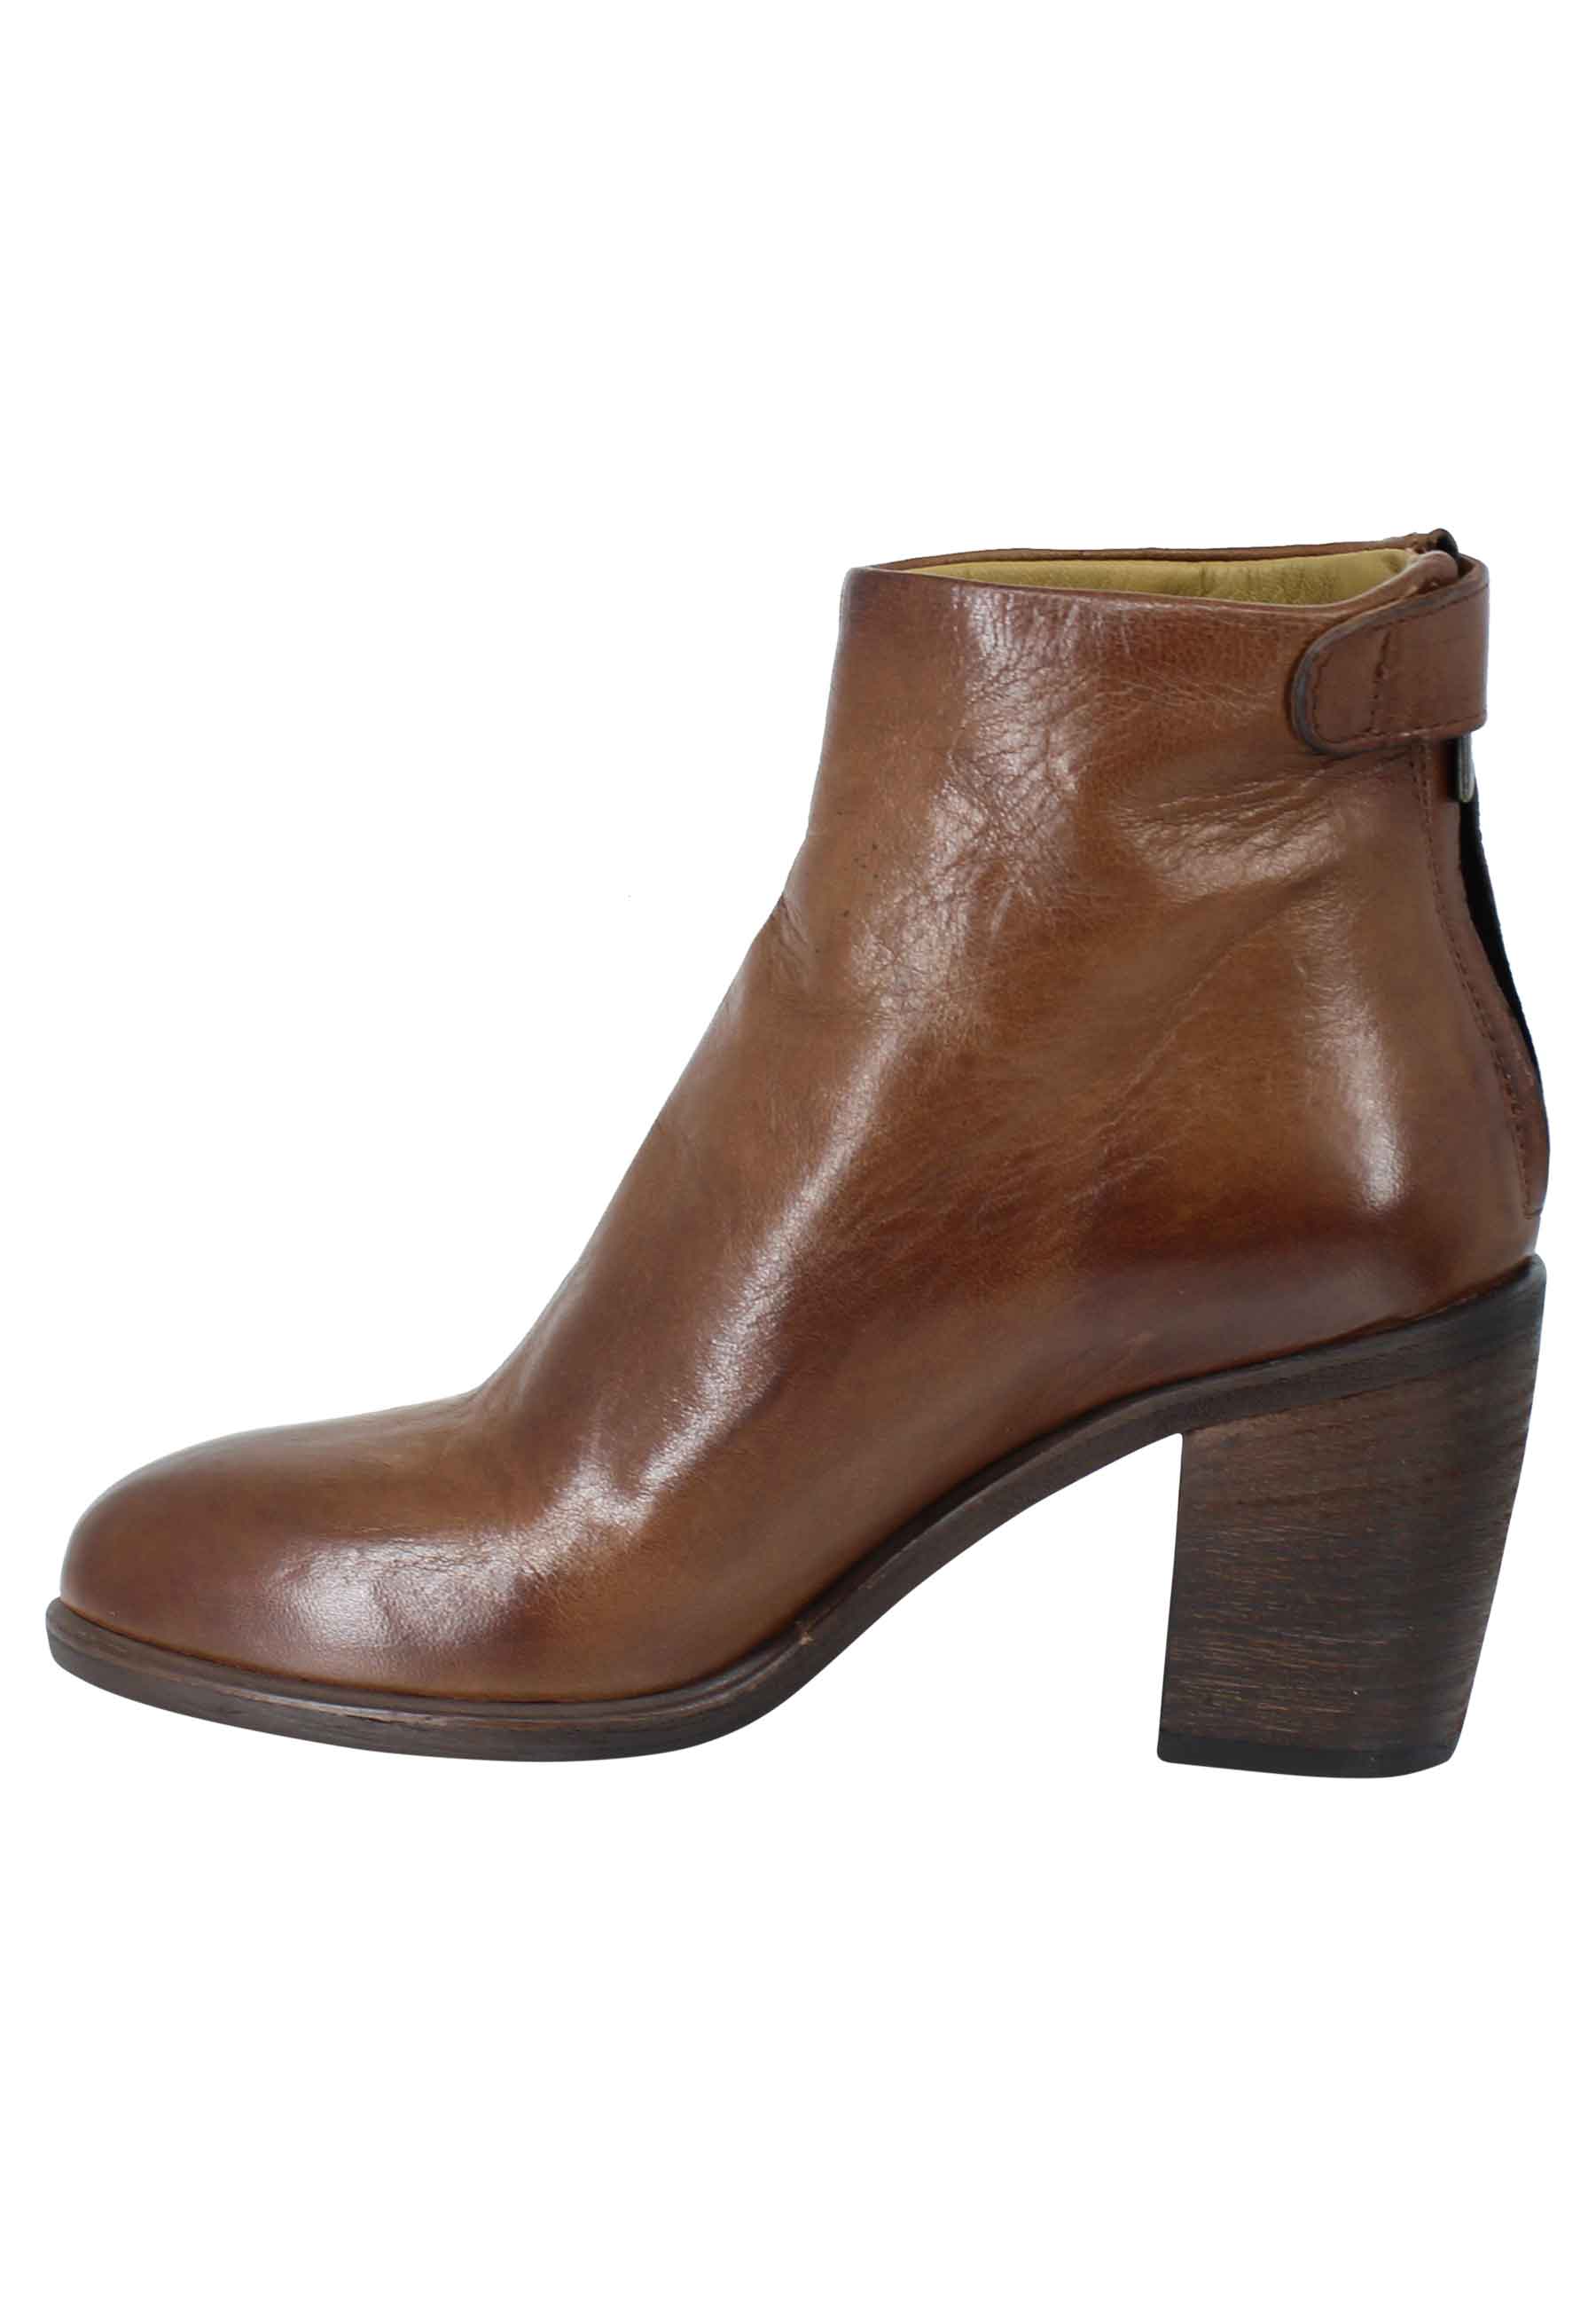 Women's high heel leather ankle boots with back zip